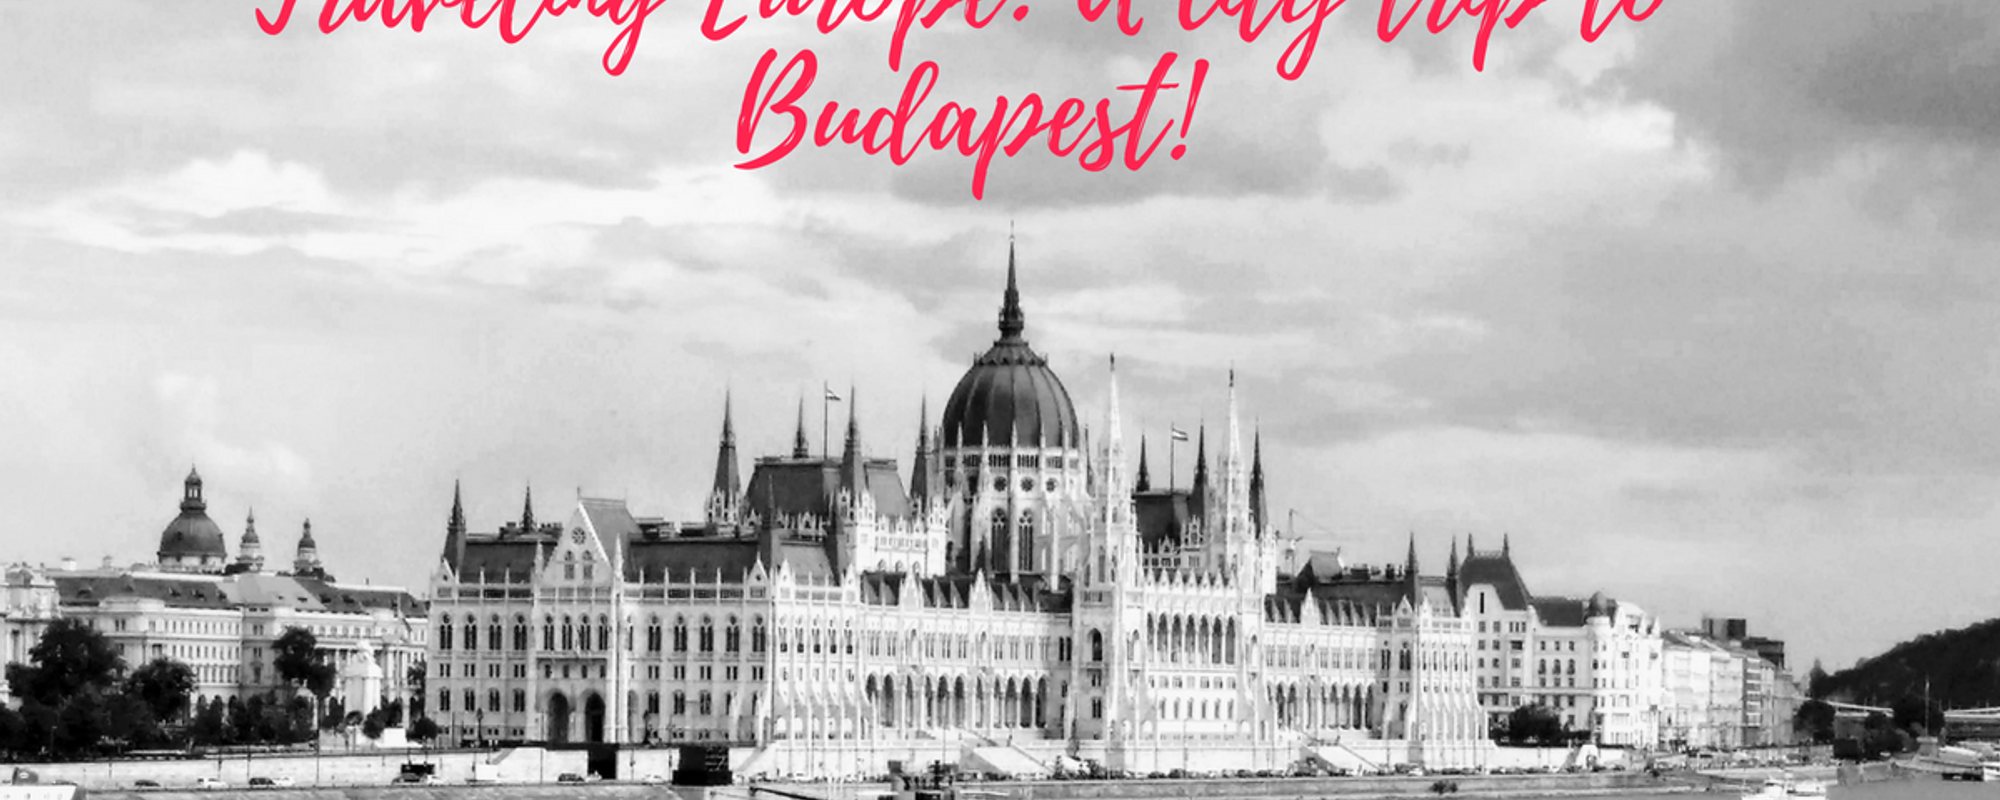 Traveling Europe: A city trip to Budapest!